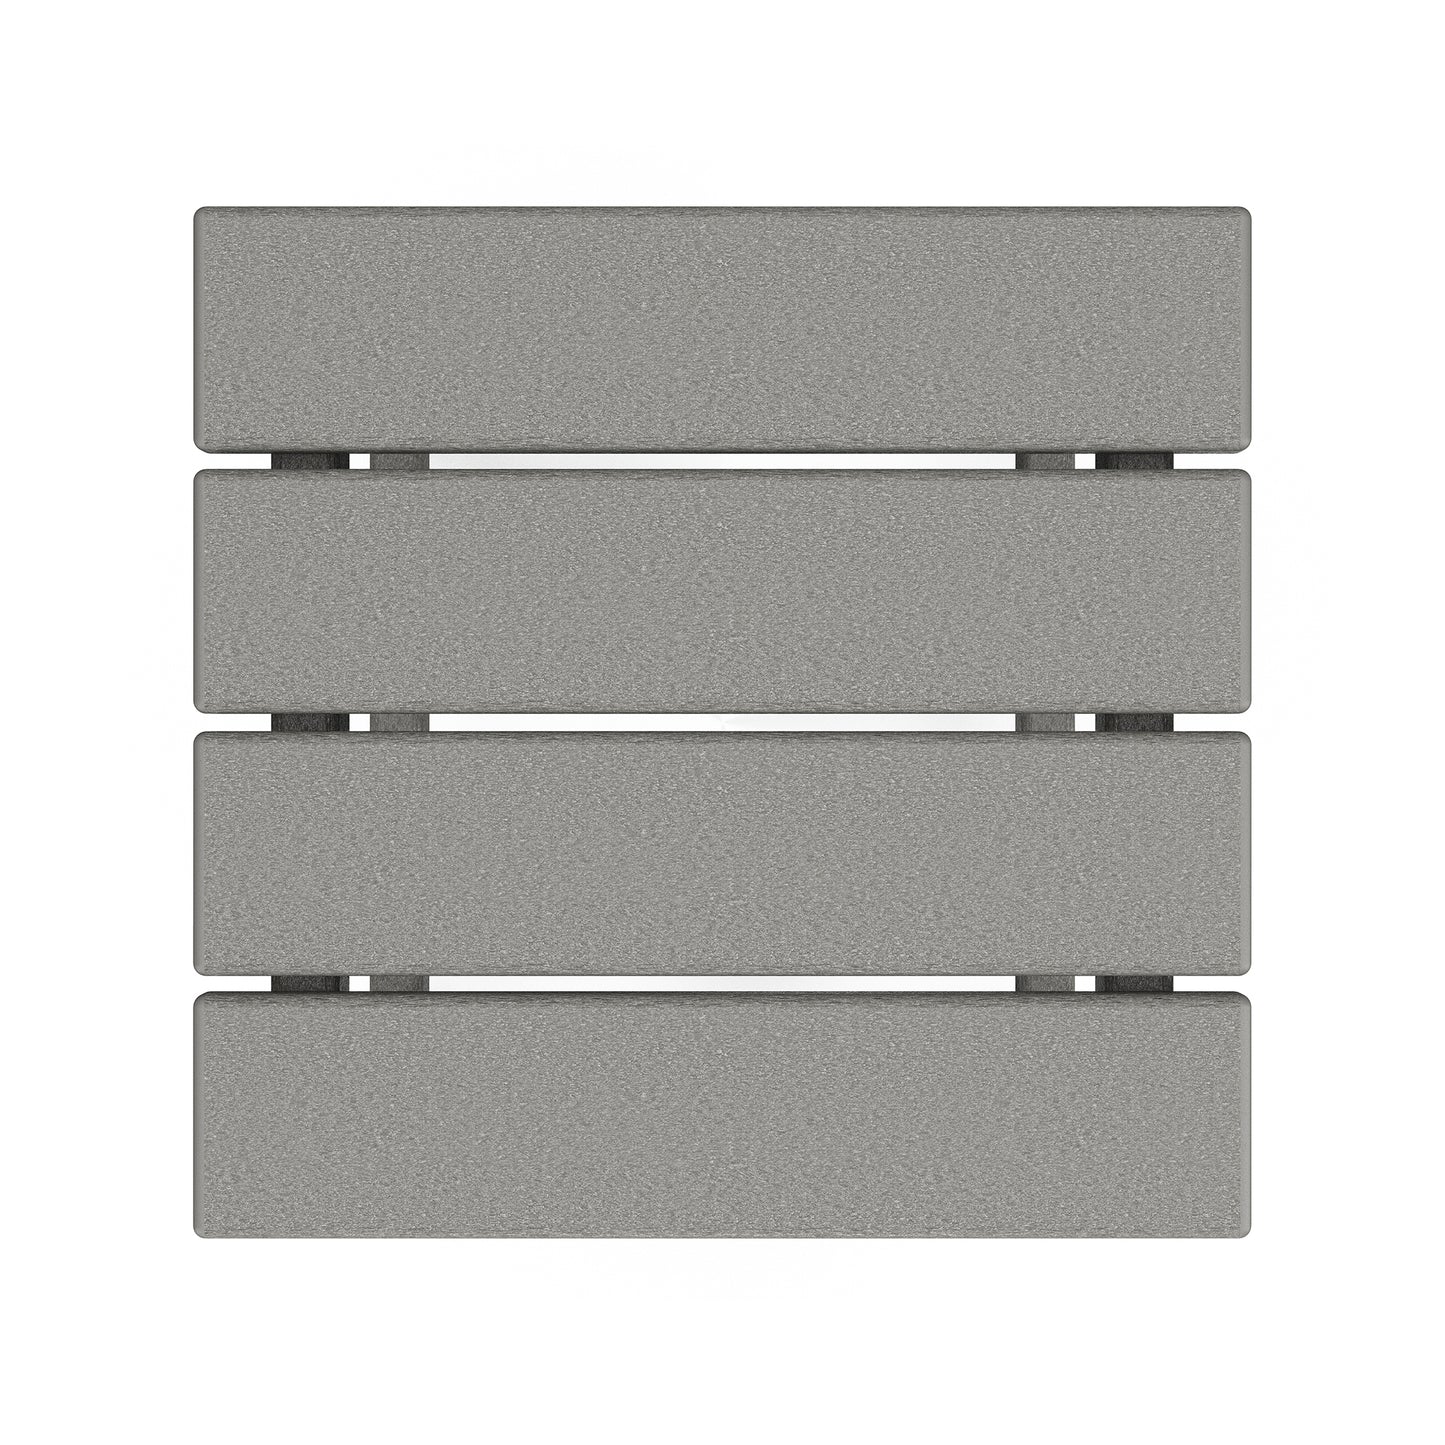 A digital image of three horizontal, gray POLYWOOD Long Island 18" Side Tables with subtle textures and black line details, aligned in a stacked layout on a matching gray background.